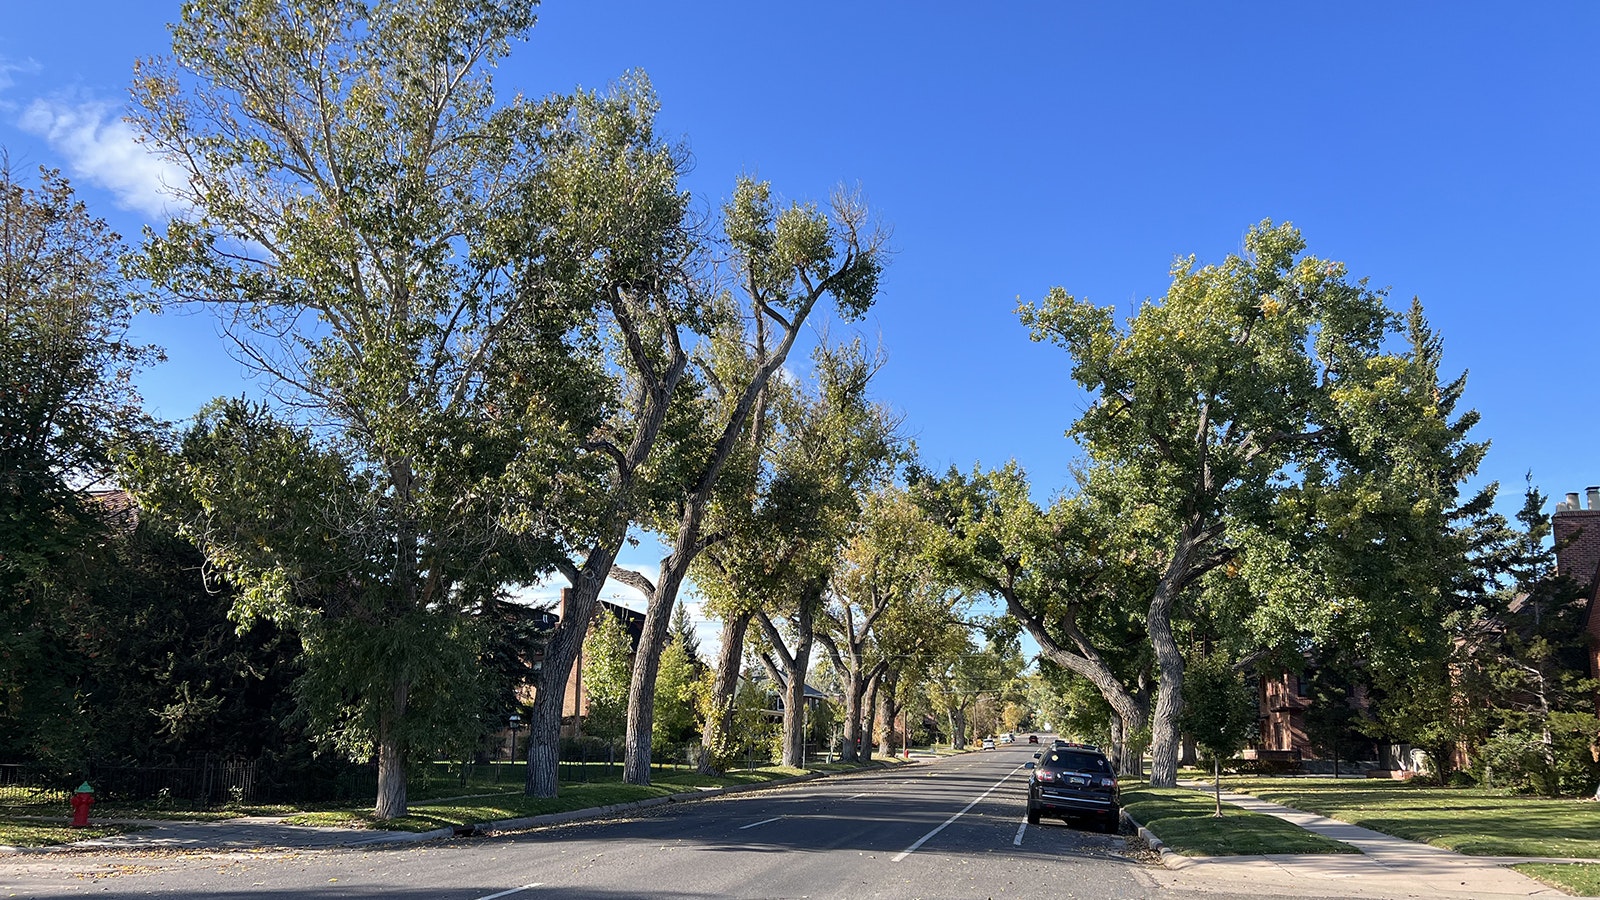 Many of Cheyenne's older neighborhoods are lined with huge, old cottonwoods and other trees.